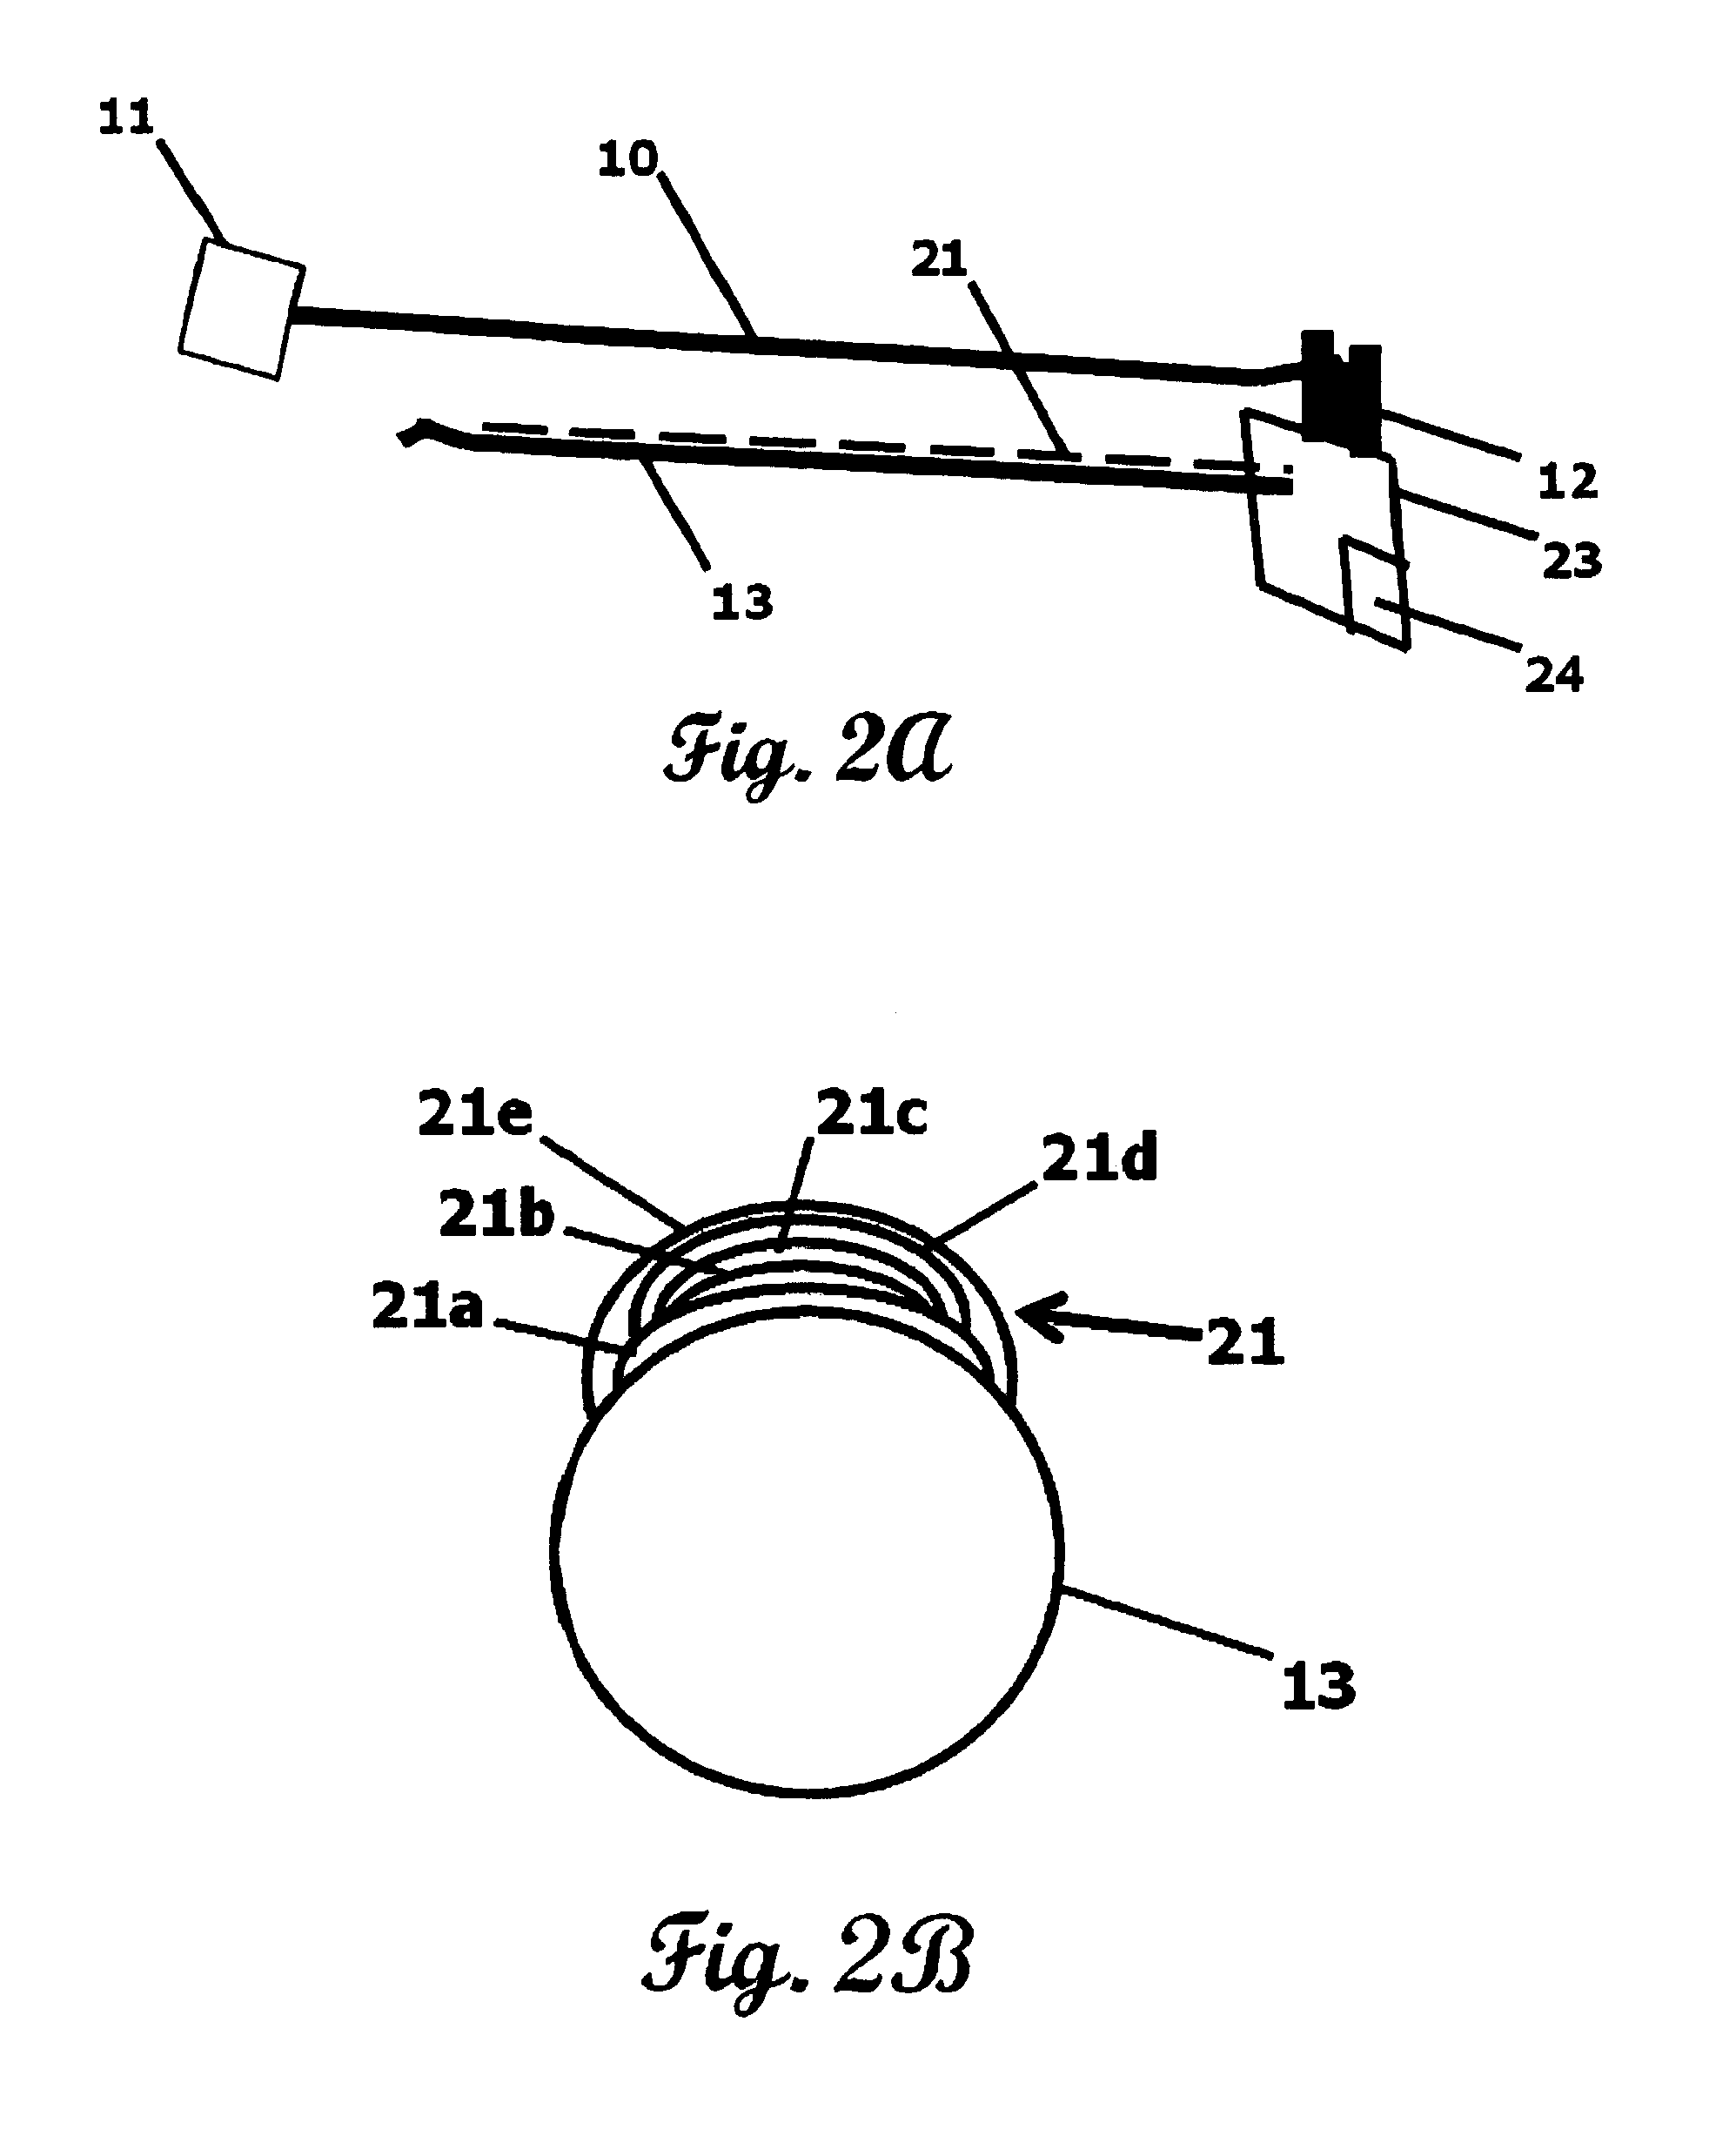 Item monitoring system and methods